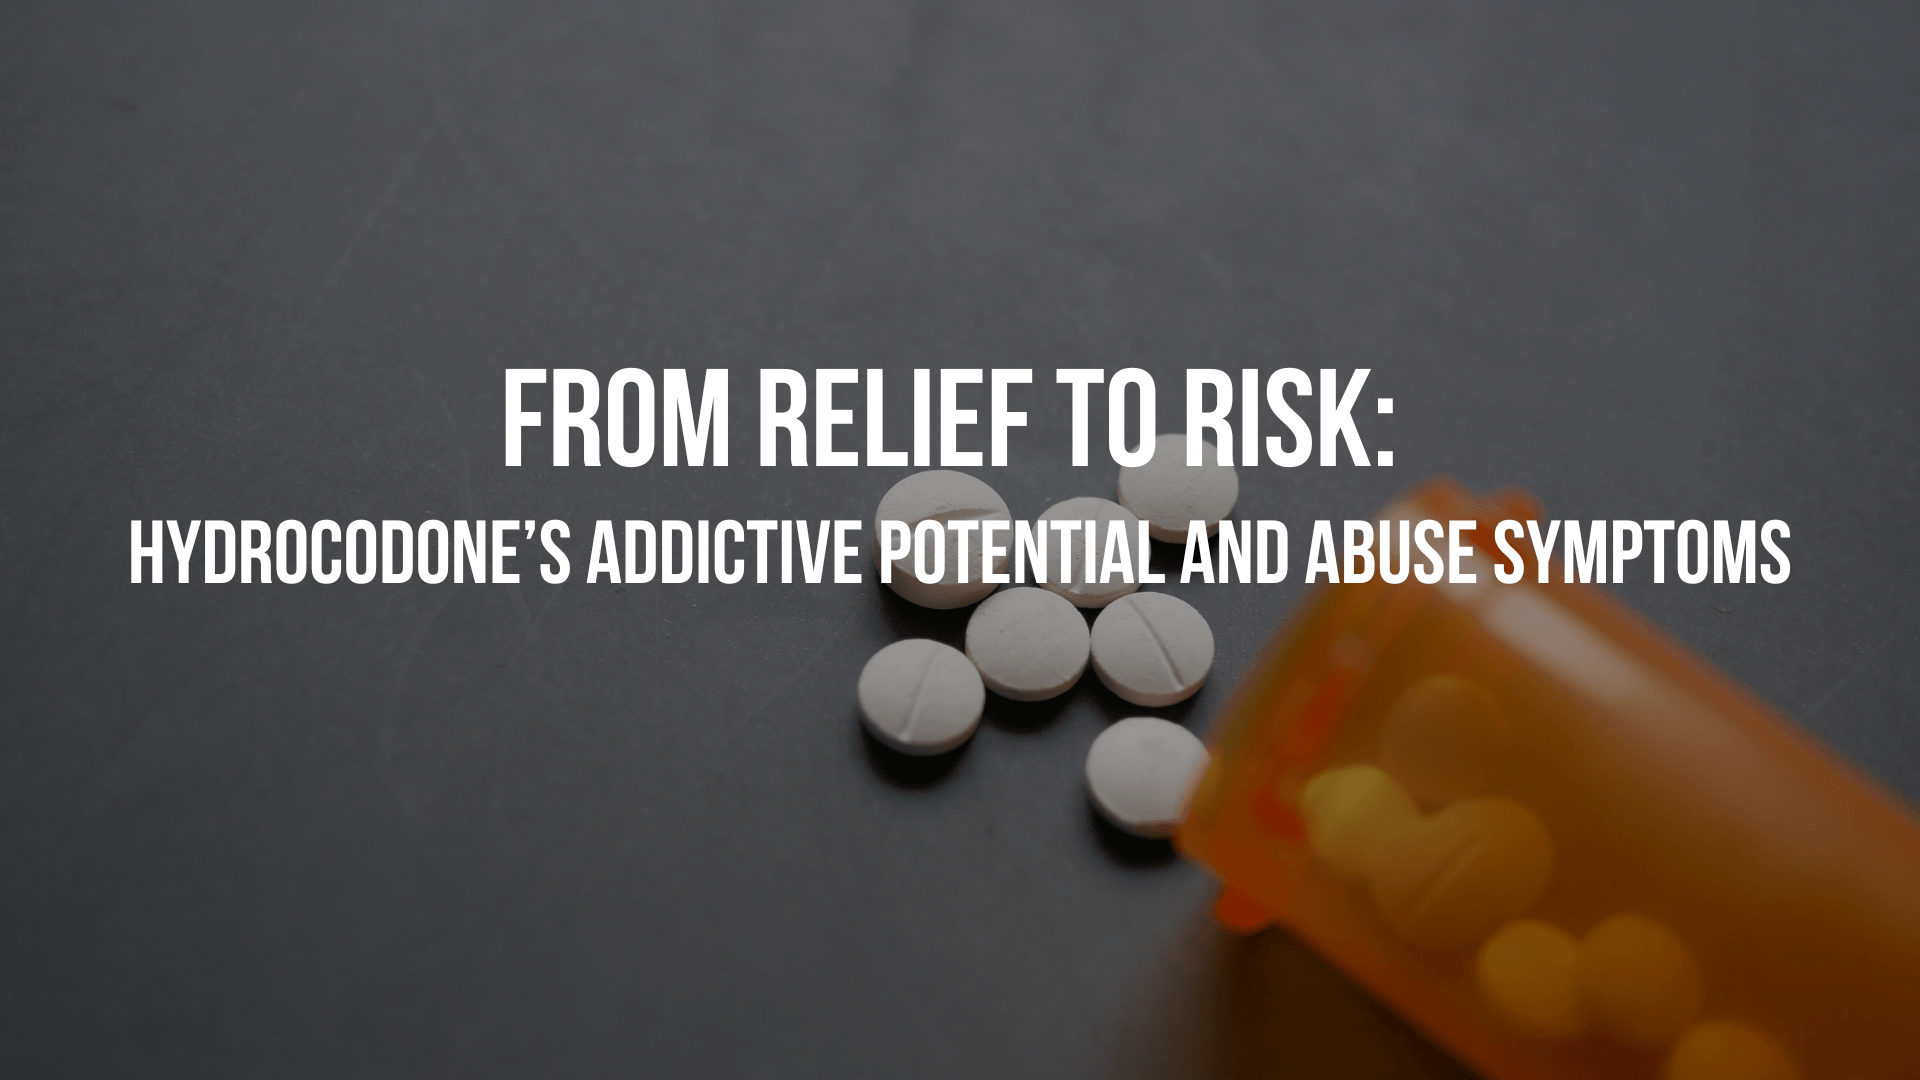 From Relief to Risk: Hydrocodone’s Addictive Potential & Abuse Symptoms